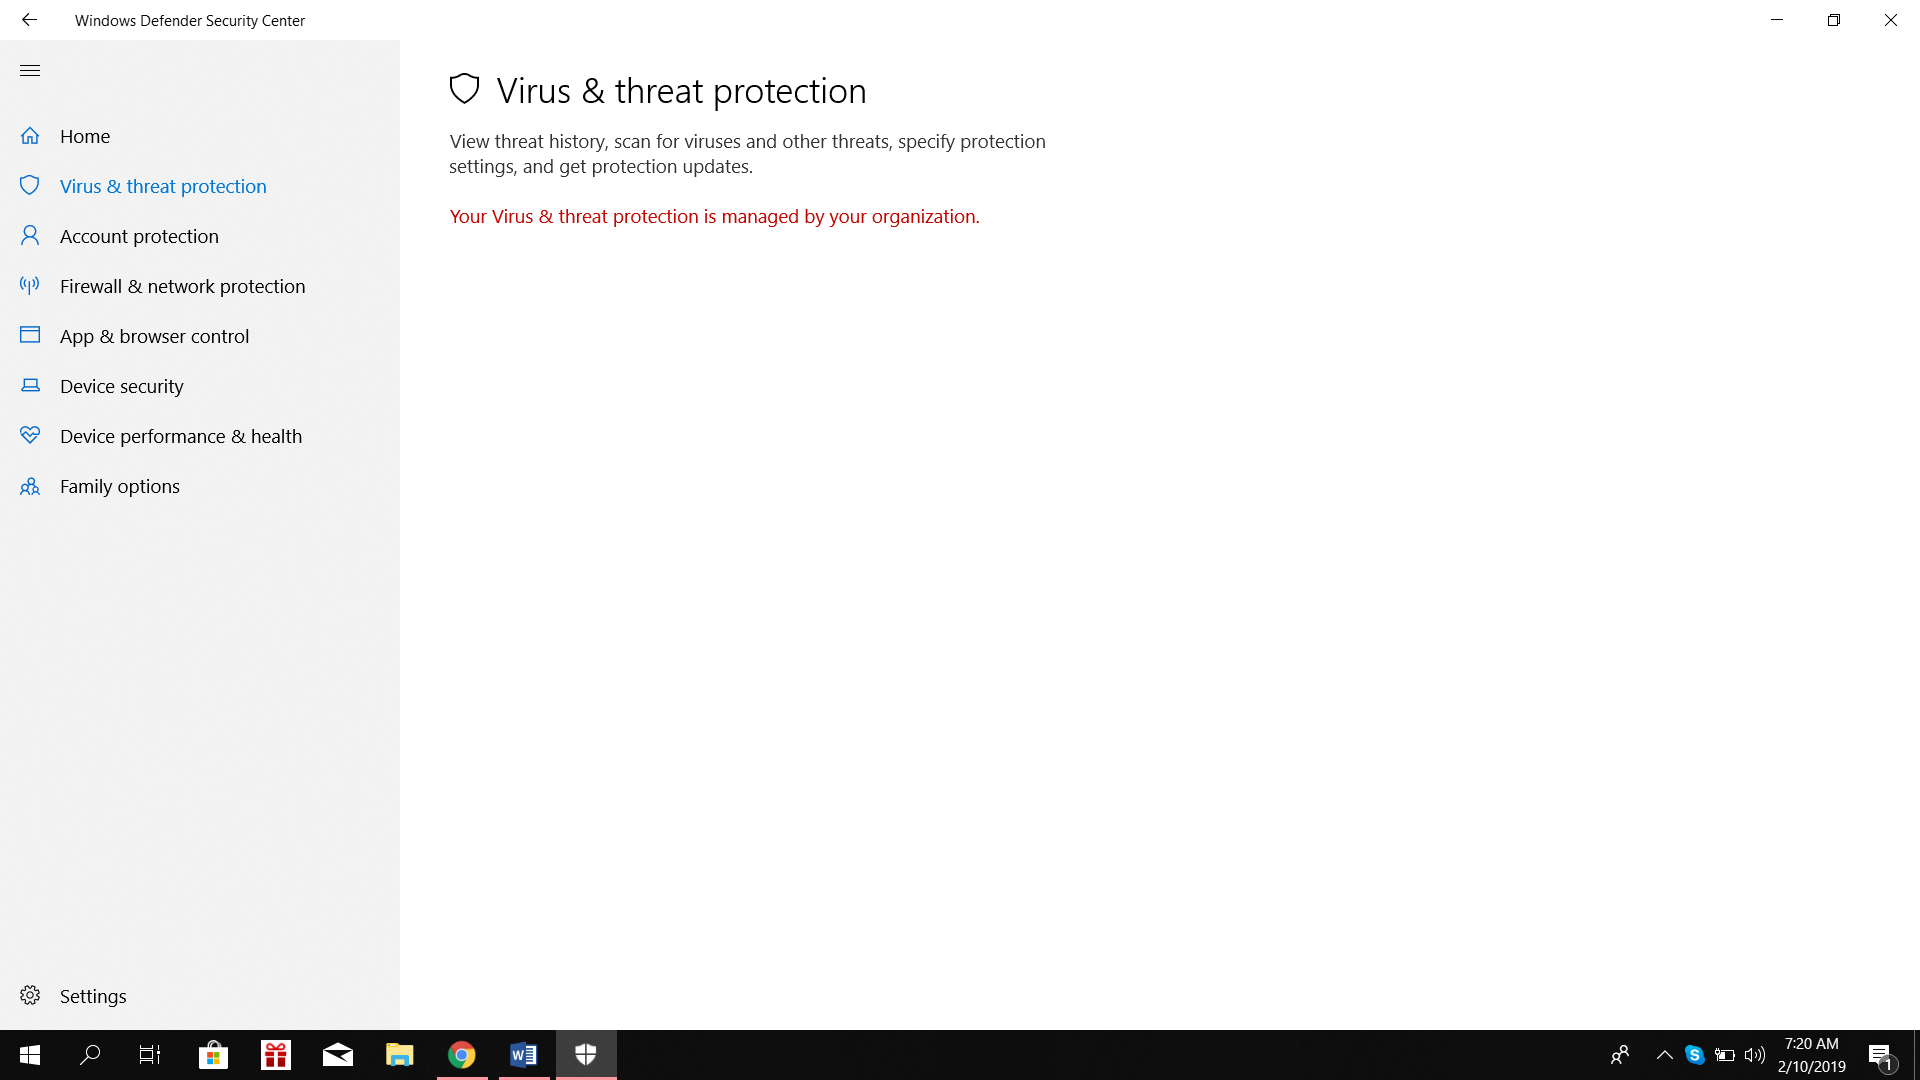 my windows defender not working properly 69104a29-59e2-4774-8d12-def84e703a14?upload=true.png